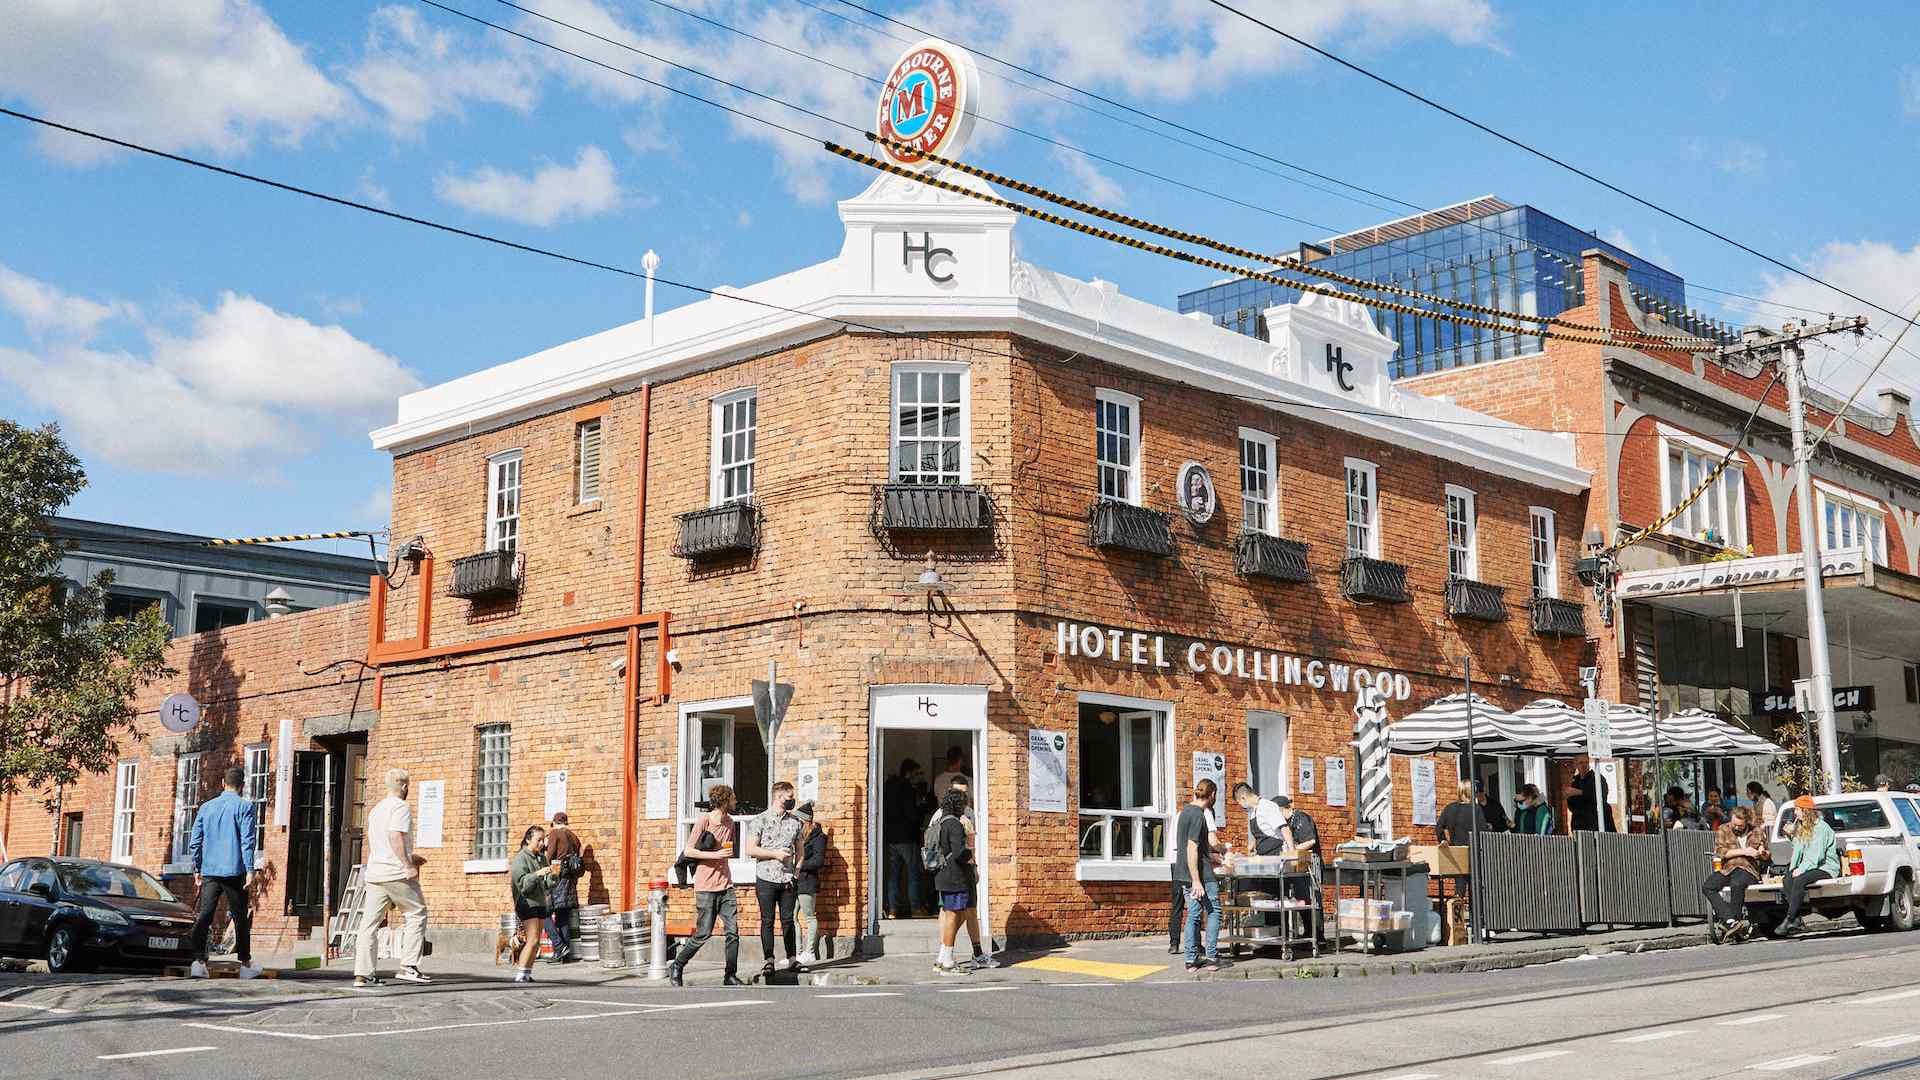 Hotel Collingwood Is the New Northside Pub Launching in the Former Robbie Burns Site This Week